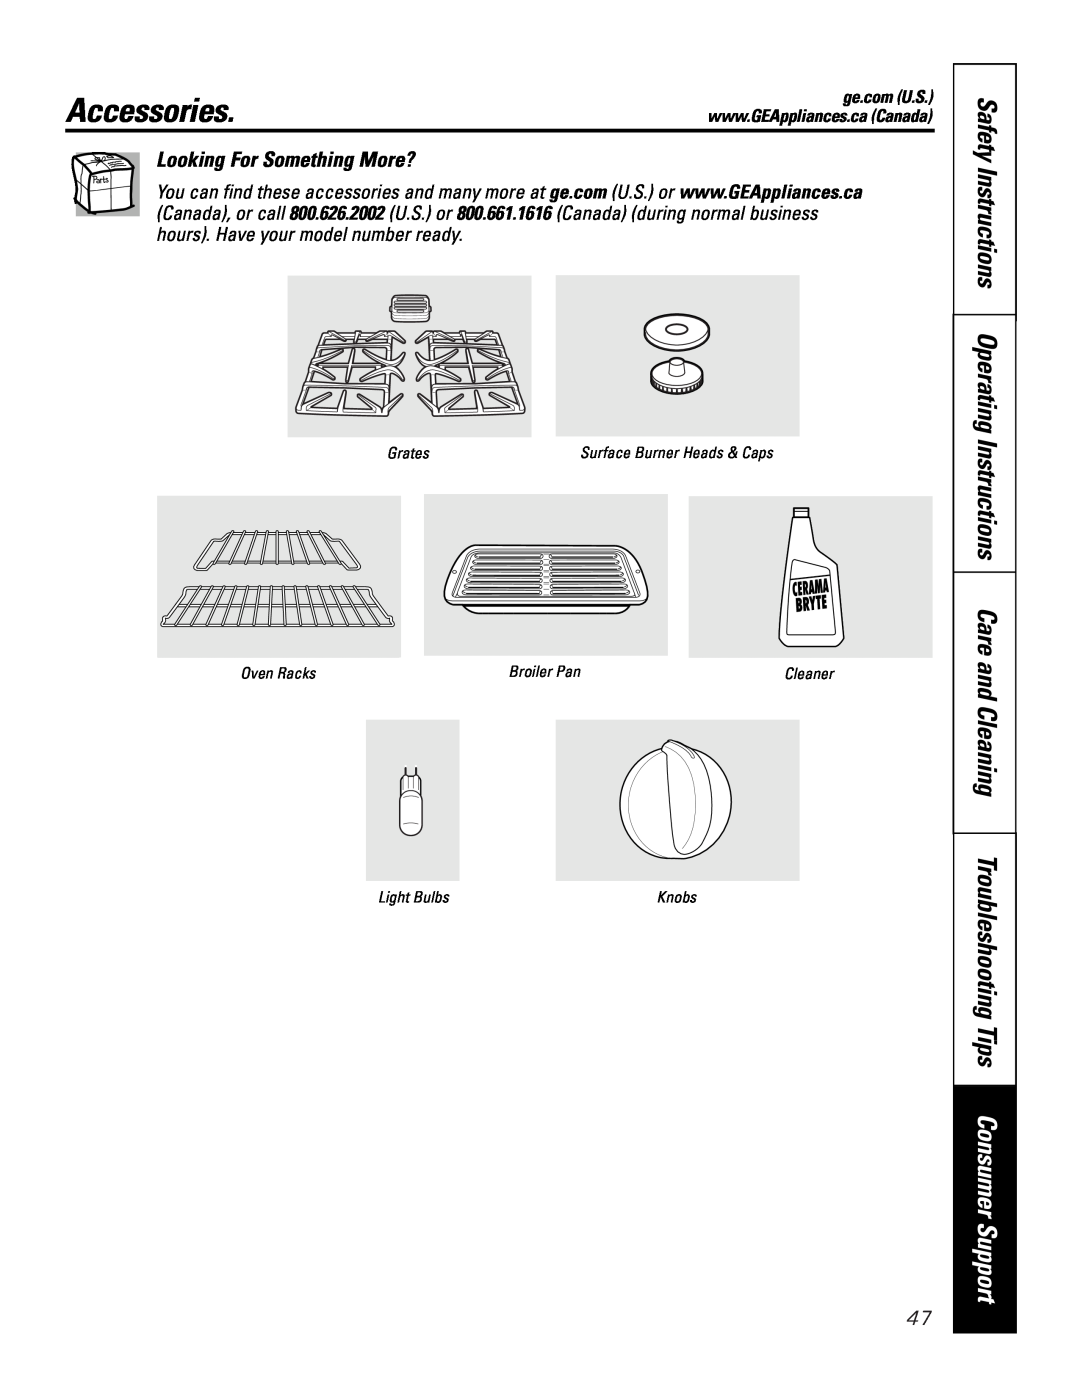 GE PGS968 Accessories, Looking For Something More?, Grates, Surface Burner Heads & Caps, Oven Racks, Broiler Pan, Cleaner 